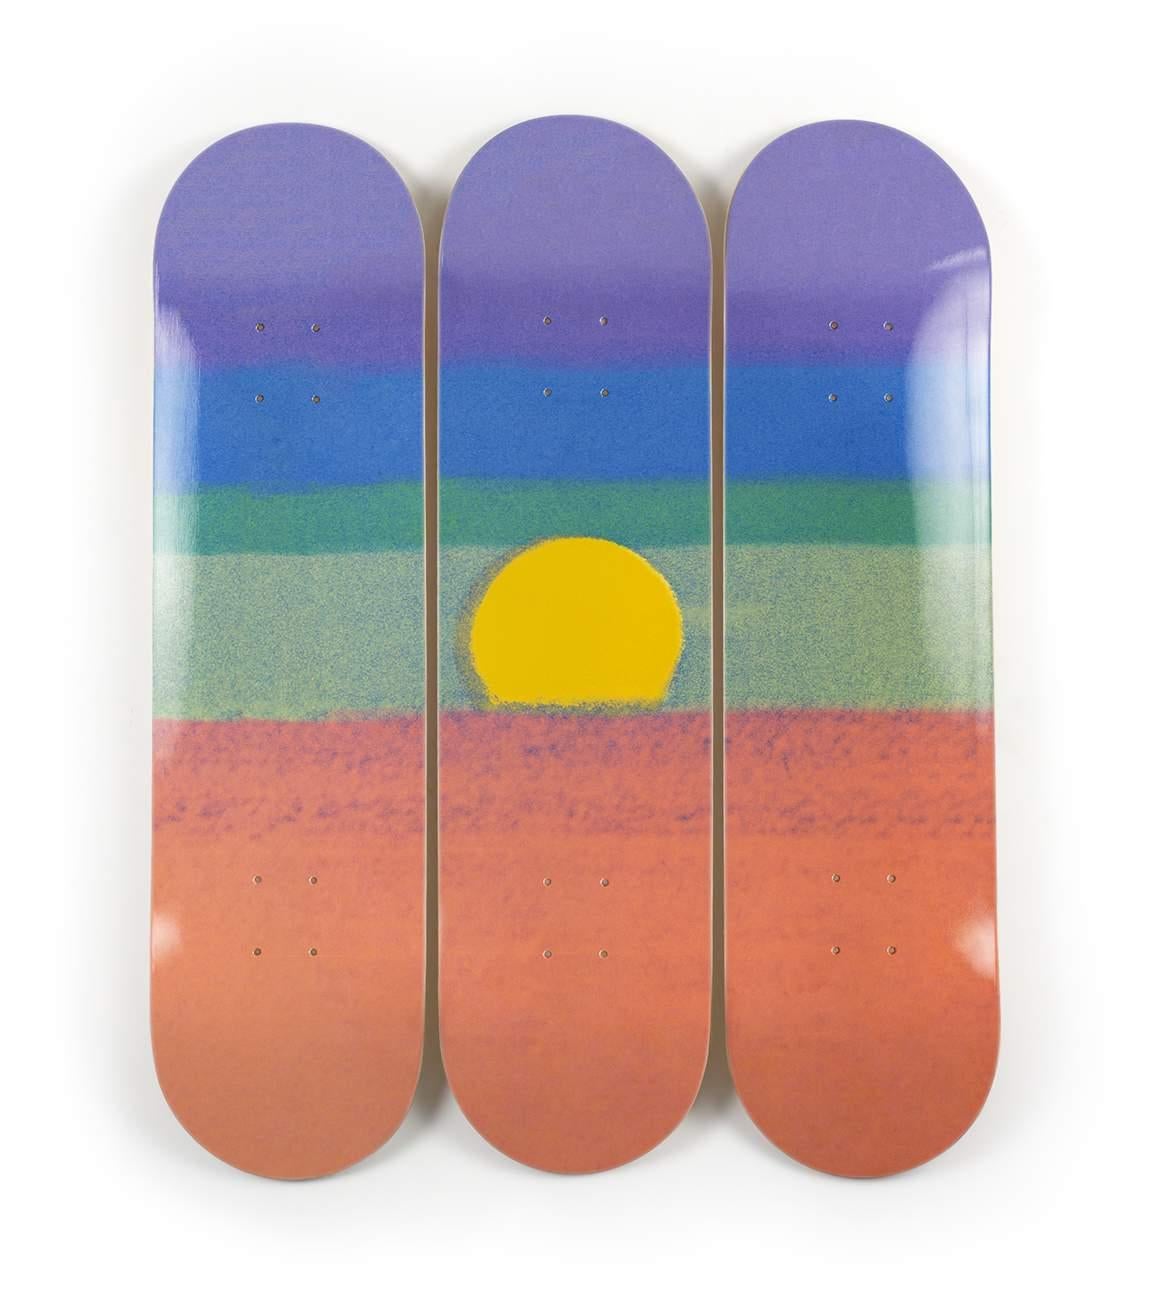 after Andy Warhol - SUNSET (ORANGE)
Date of creation: 2019
Medium: Digital print on Canadian maple wood
Edition: 500
Size: 80 x 20 cm (each skate)
Condition: In mint conditions and never displayed
This work is formed by three skate decks made of 7